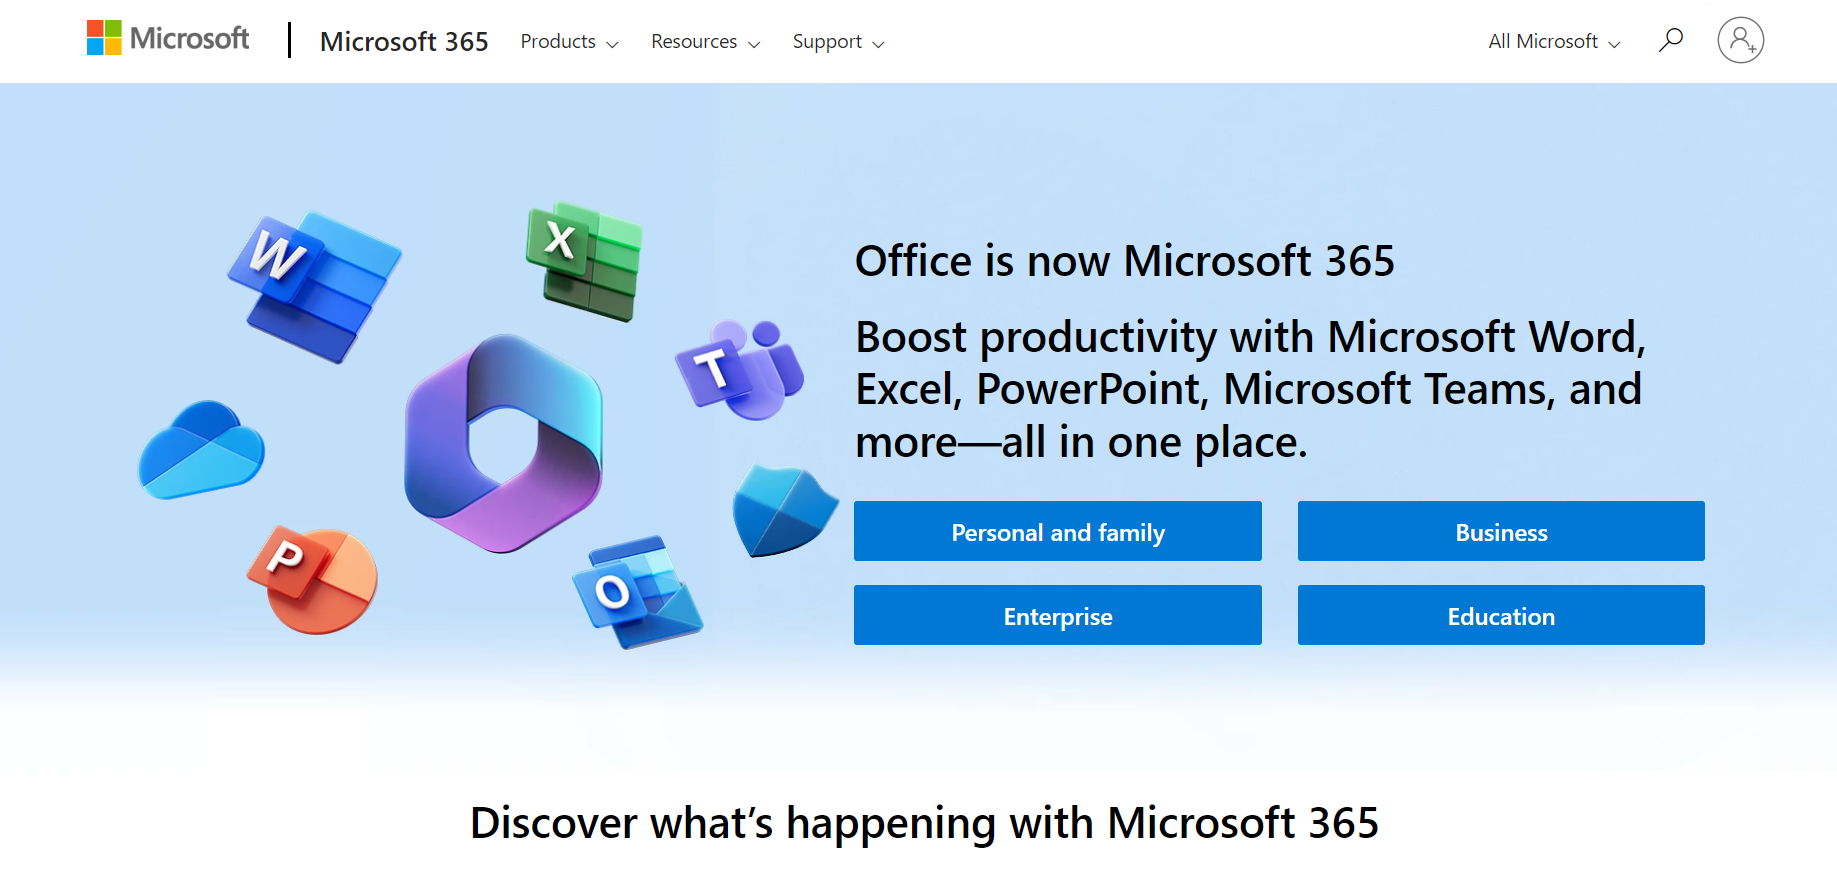 Microsoft 365 (previously Office 365)